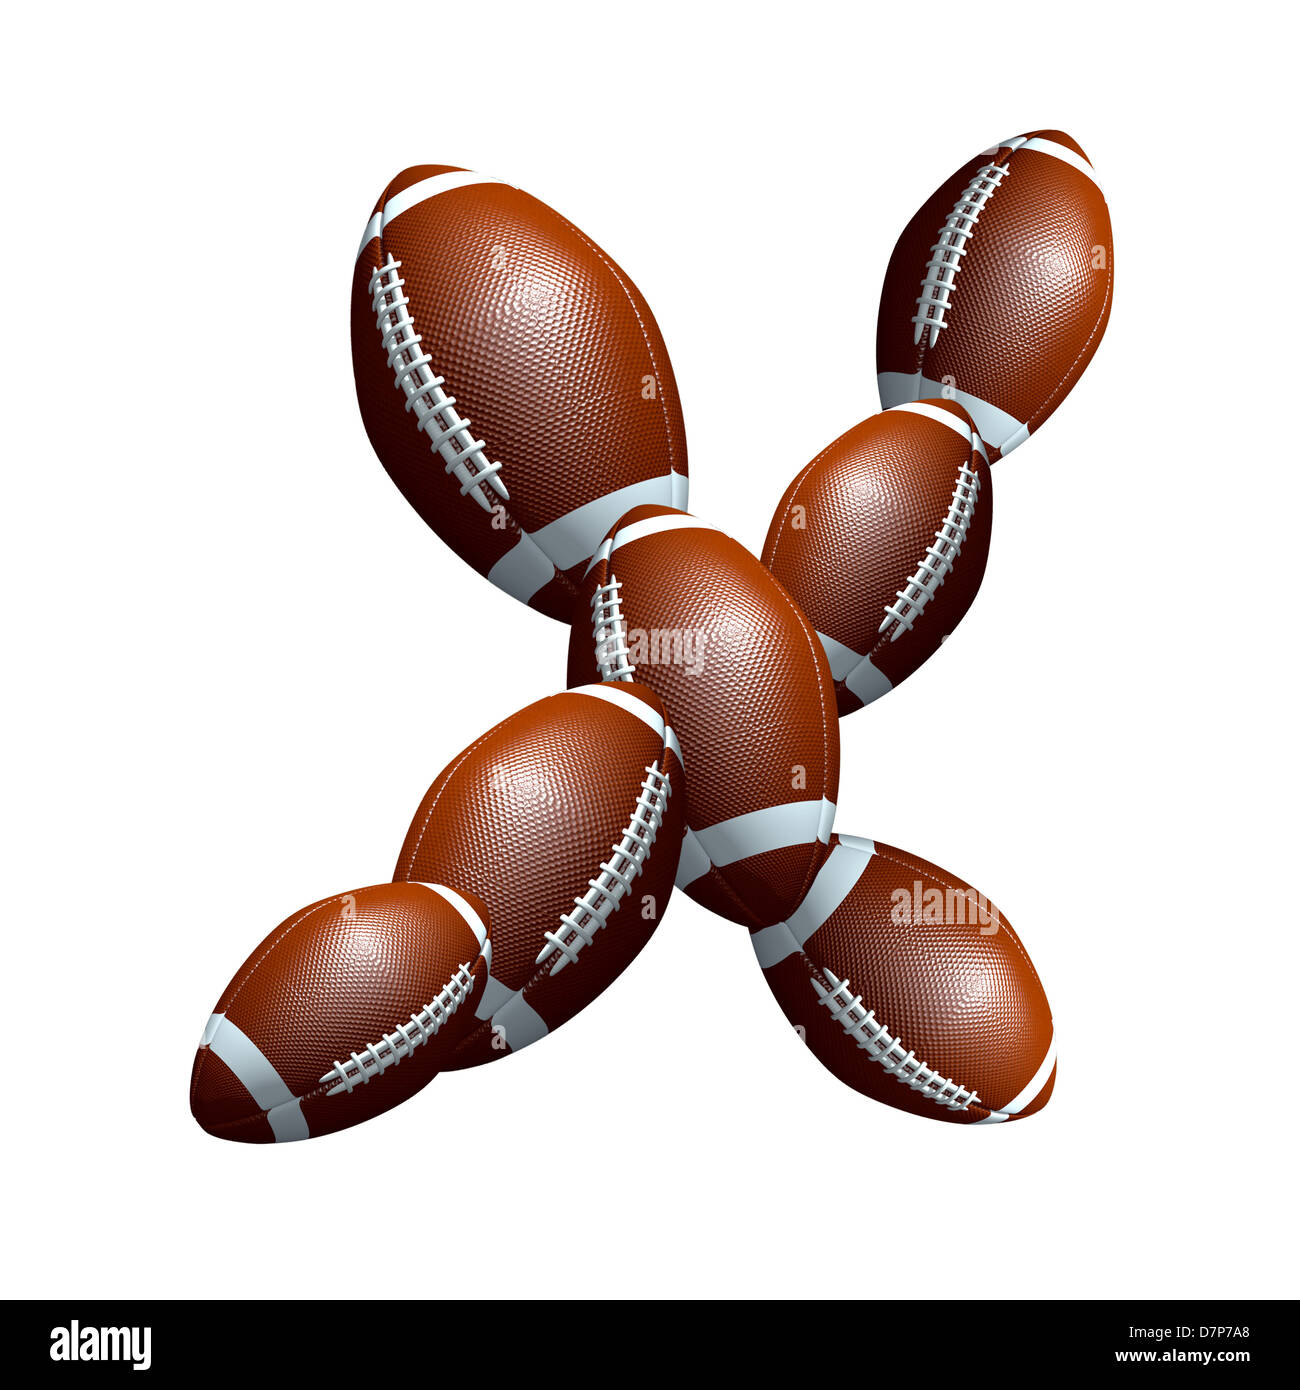 american football icon,  letter of the alphabet, font type icon designed out of a balls illustration Stock Photo